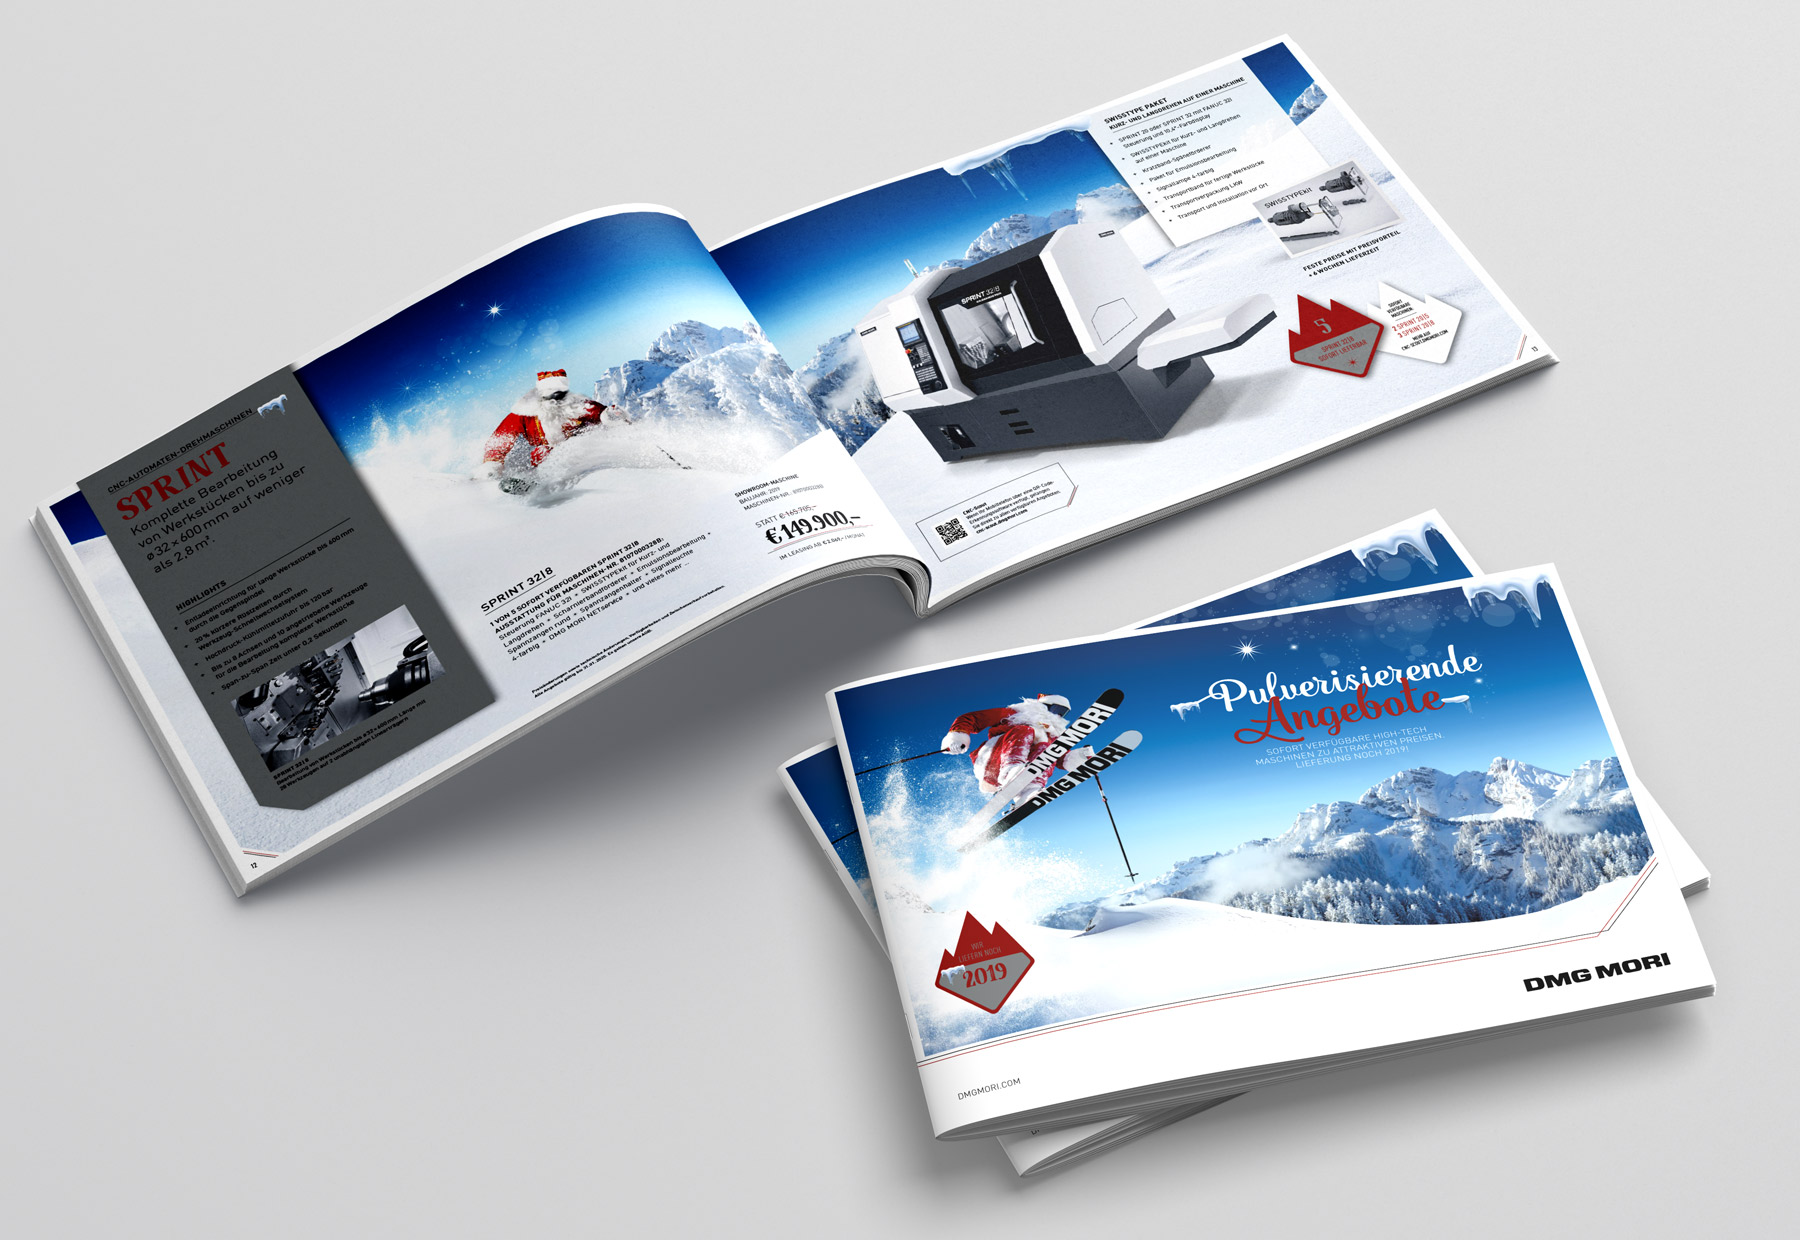 DMG MORI End of Year Mailing 2019